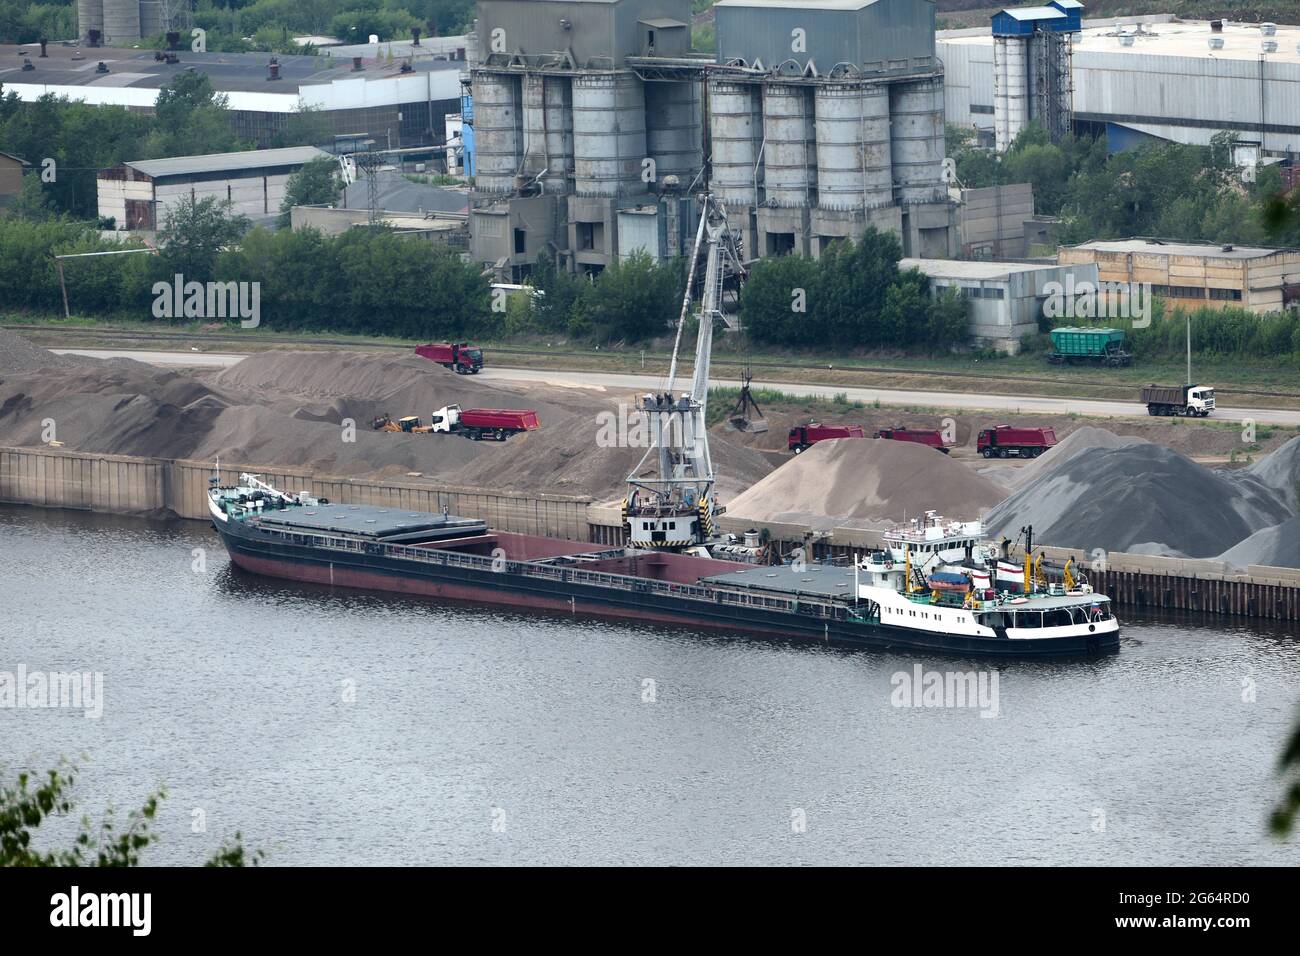 Barge on the river Unloading river sand from a barge Navigable river, river port Stock Photo